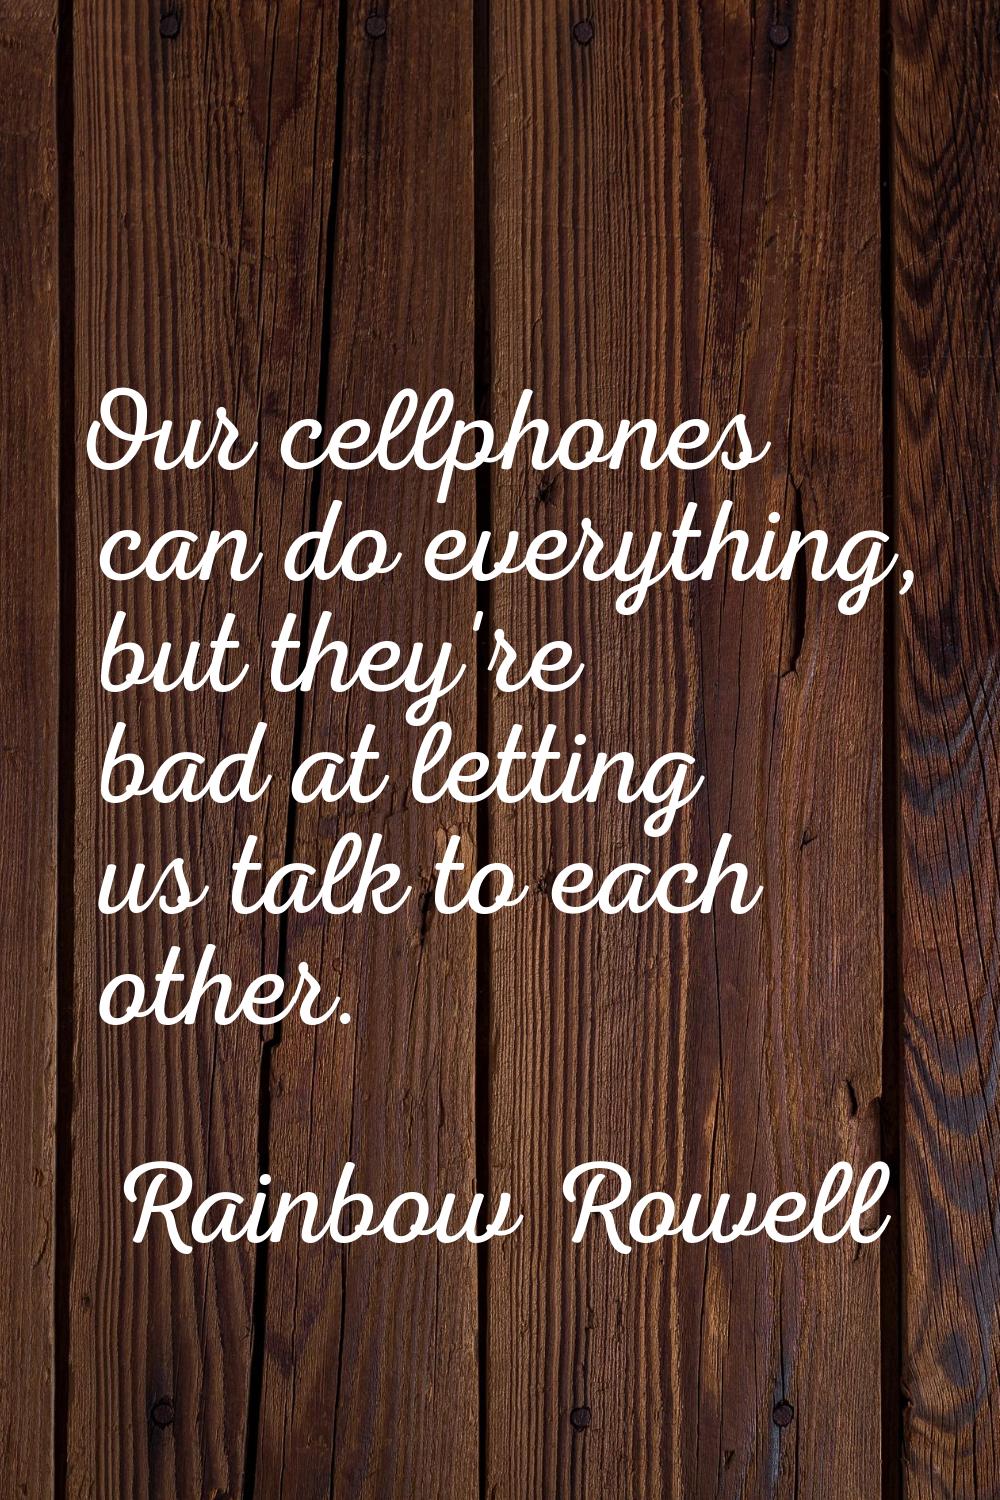 Our cellphones can do everything, but they're bad at letting us talk to each other.